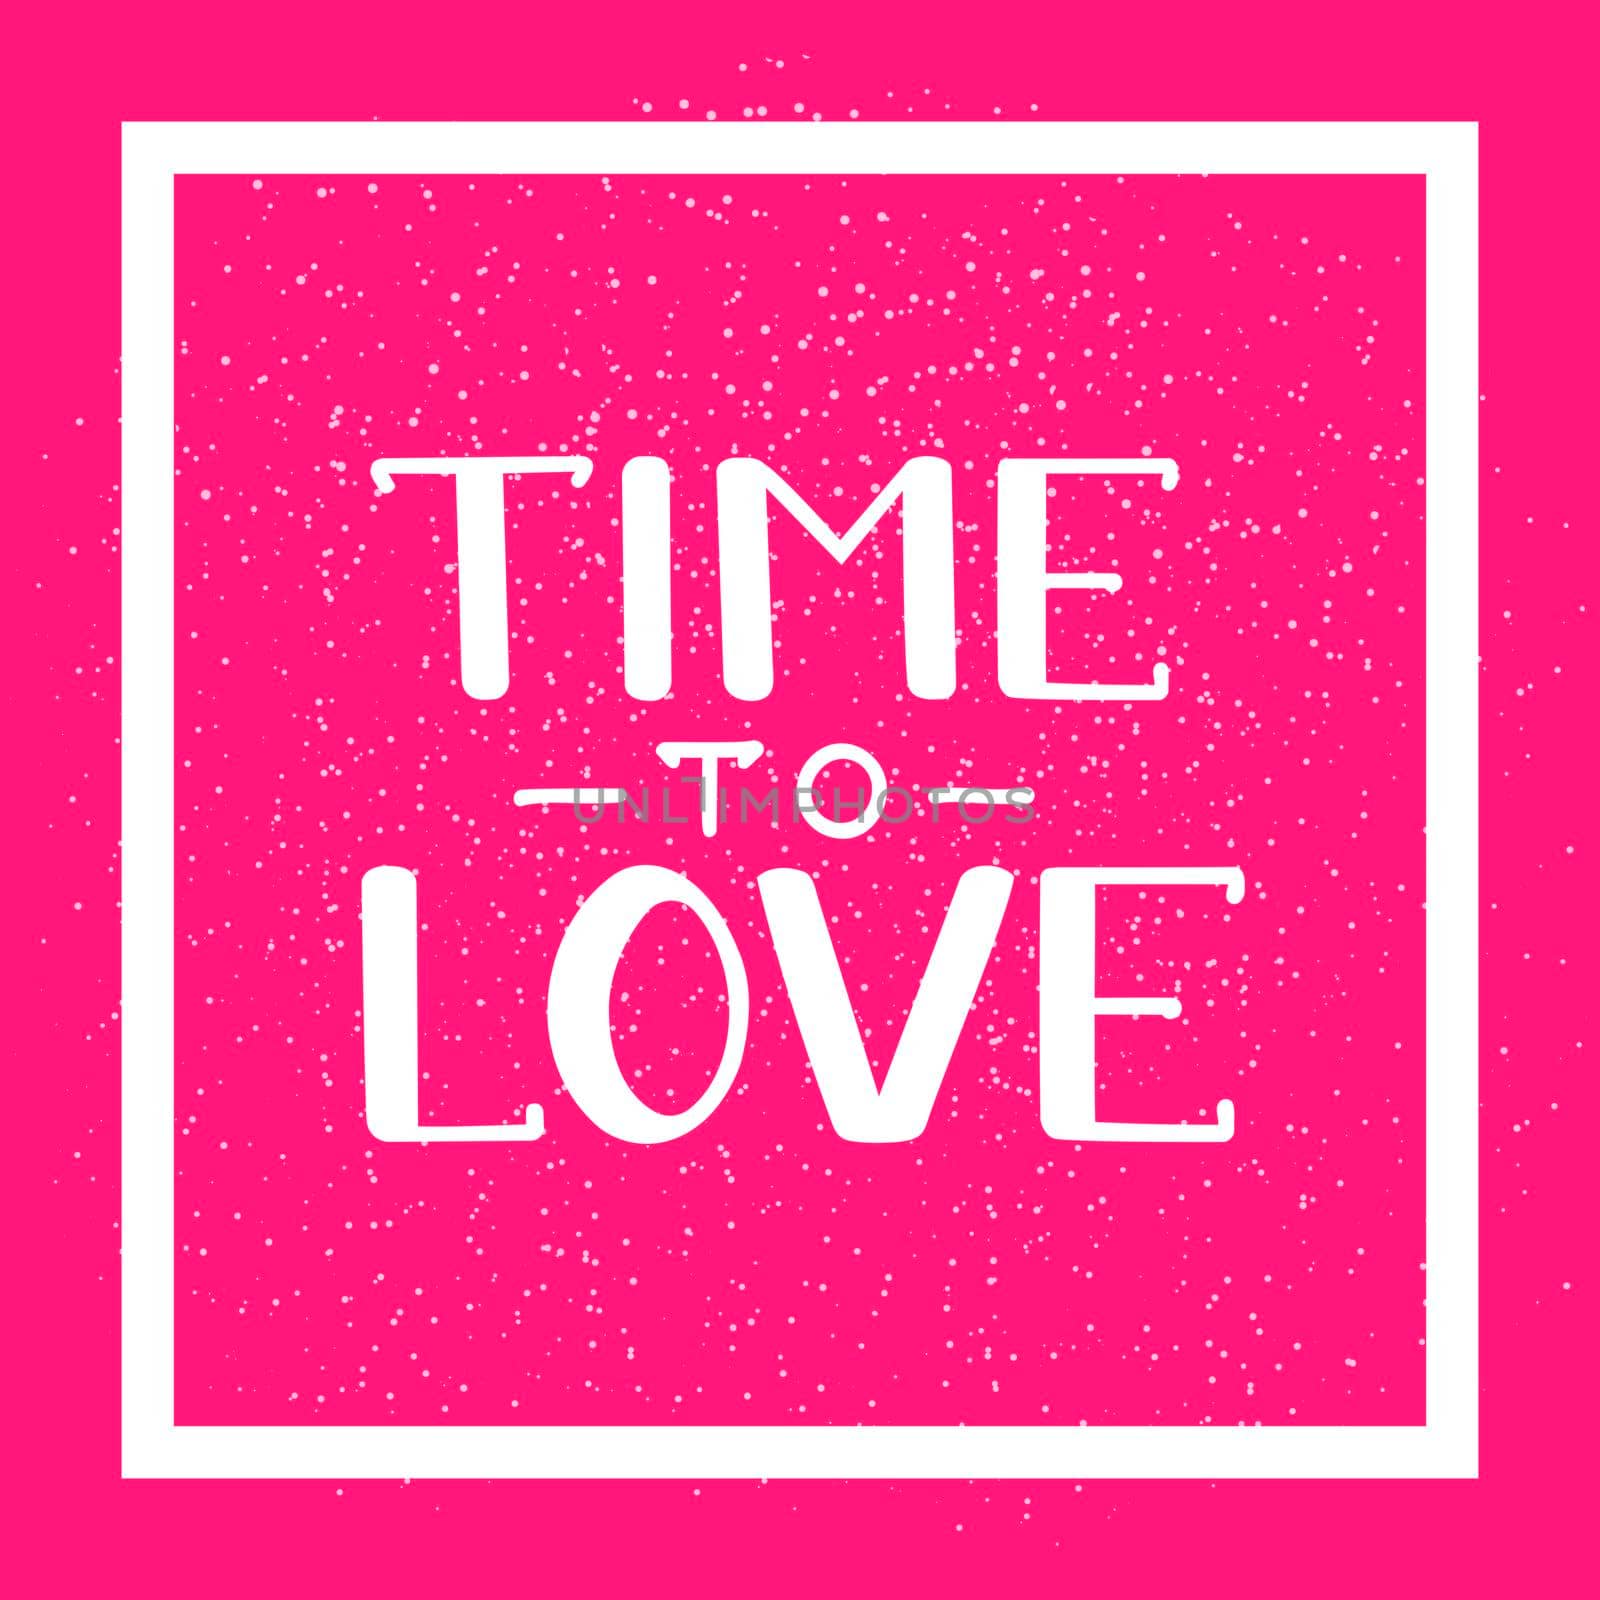 Time to love. Romantic handwritten lettering on pink background. illustration for posters, cards and much more by Marin4ik